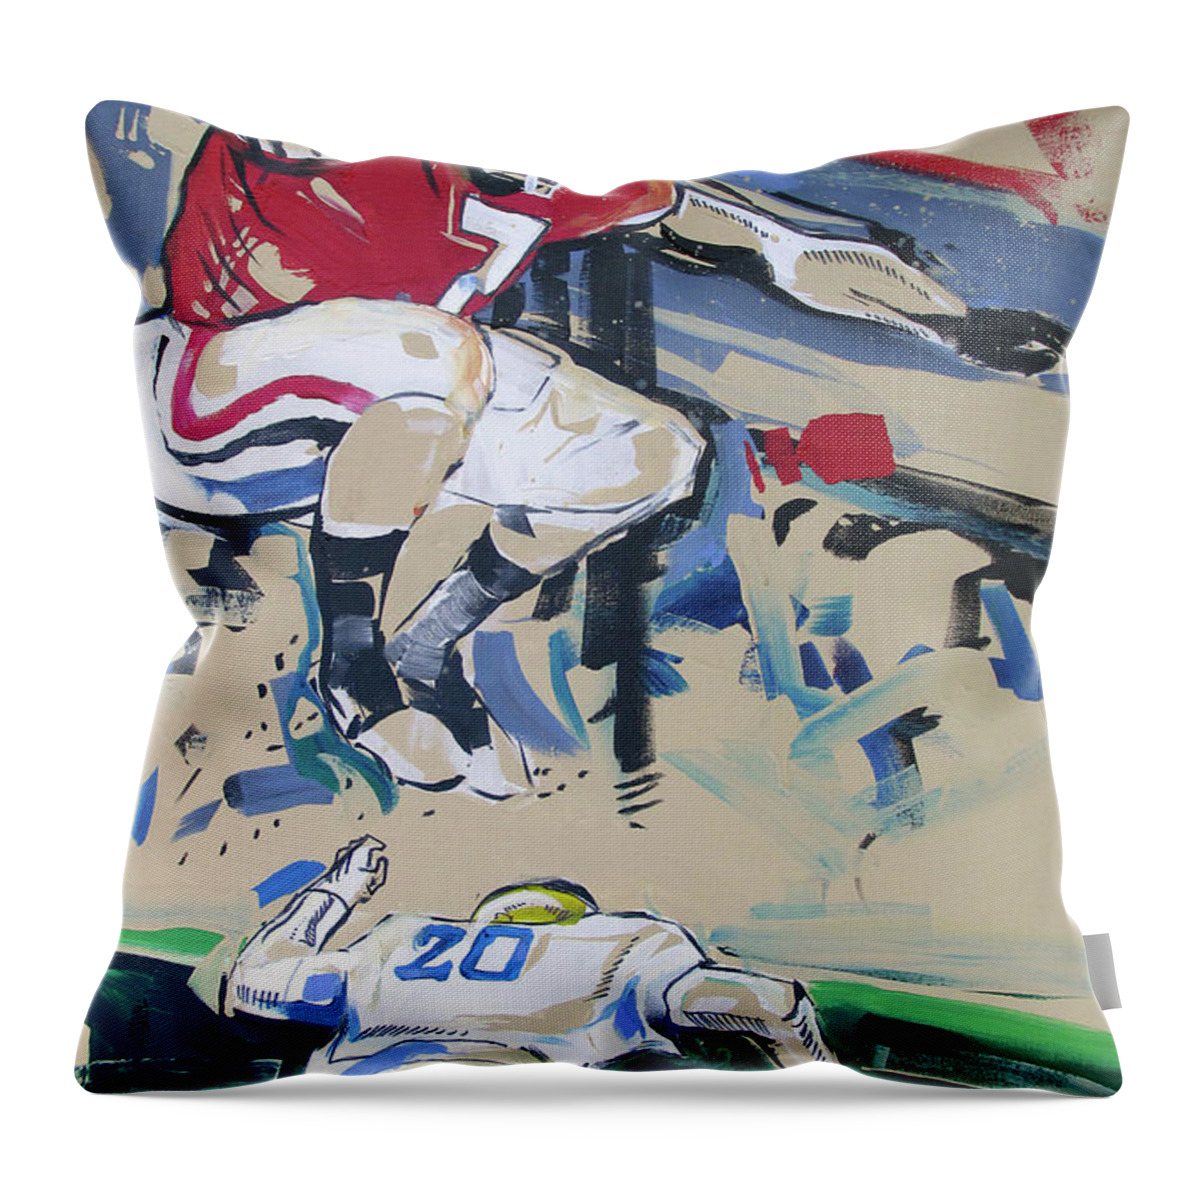 Uga Notre Dame 2019 Throw Pillow featuring the painting UGA vs Notre Dame 2019 by John Gholson